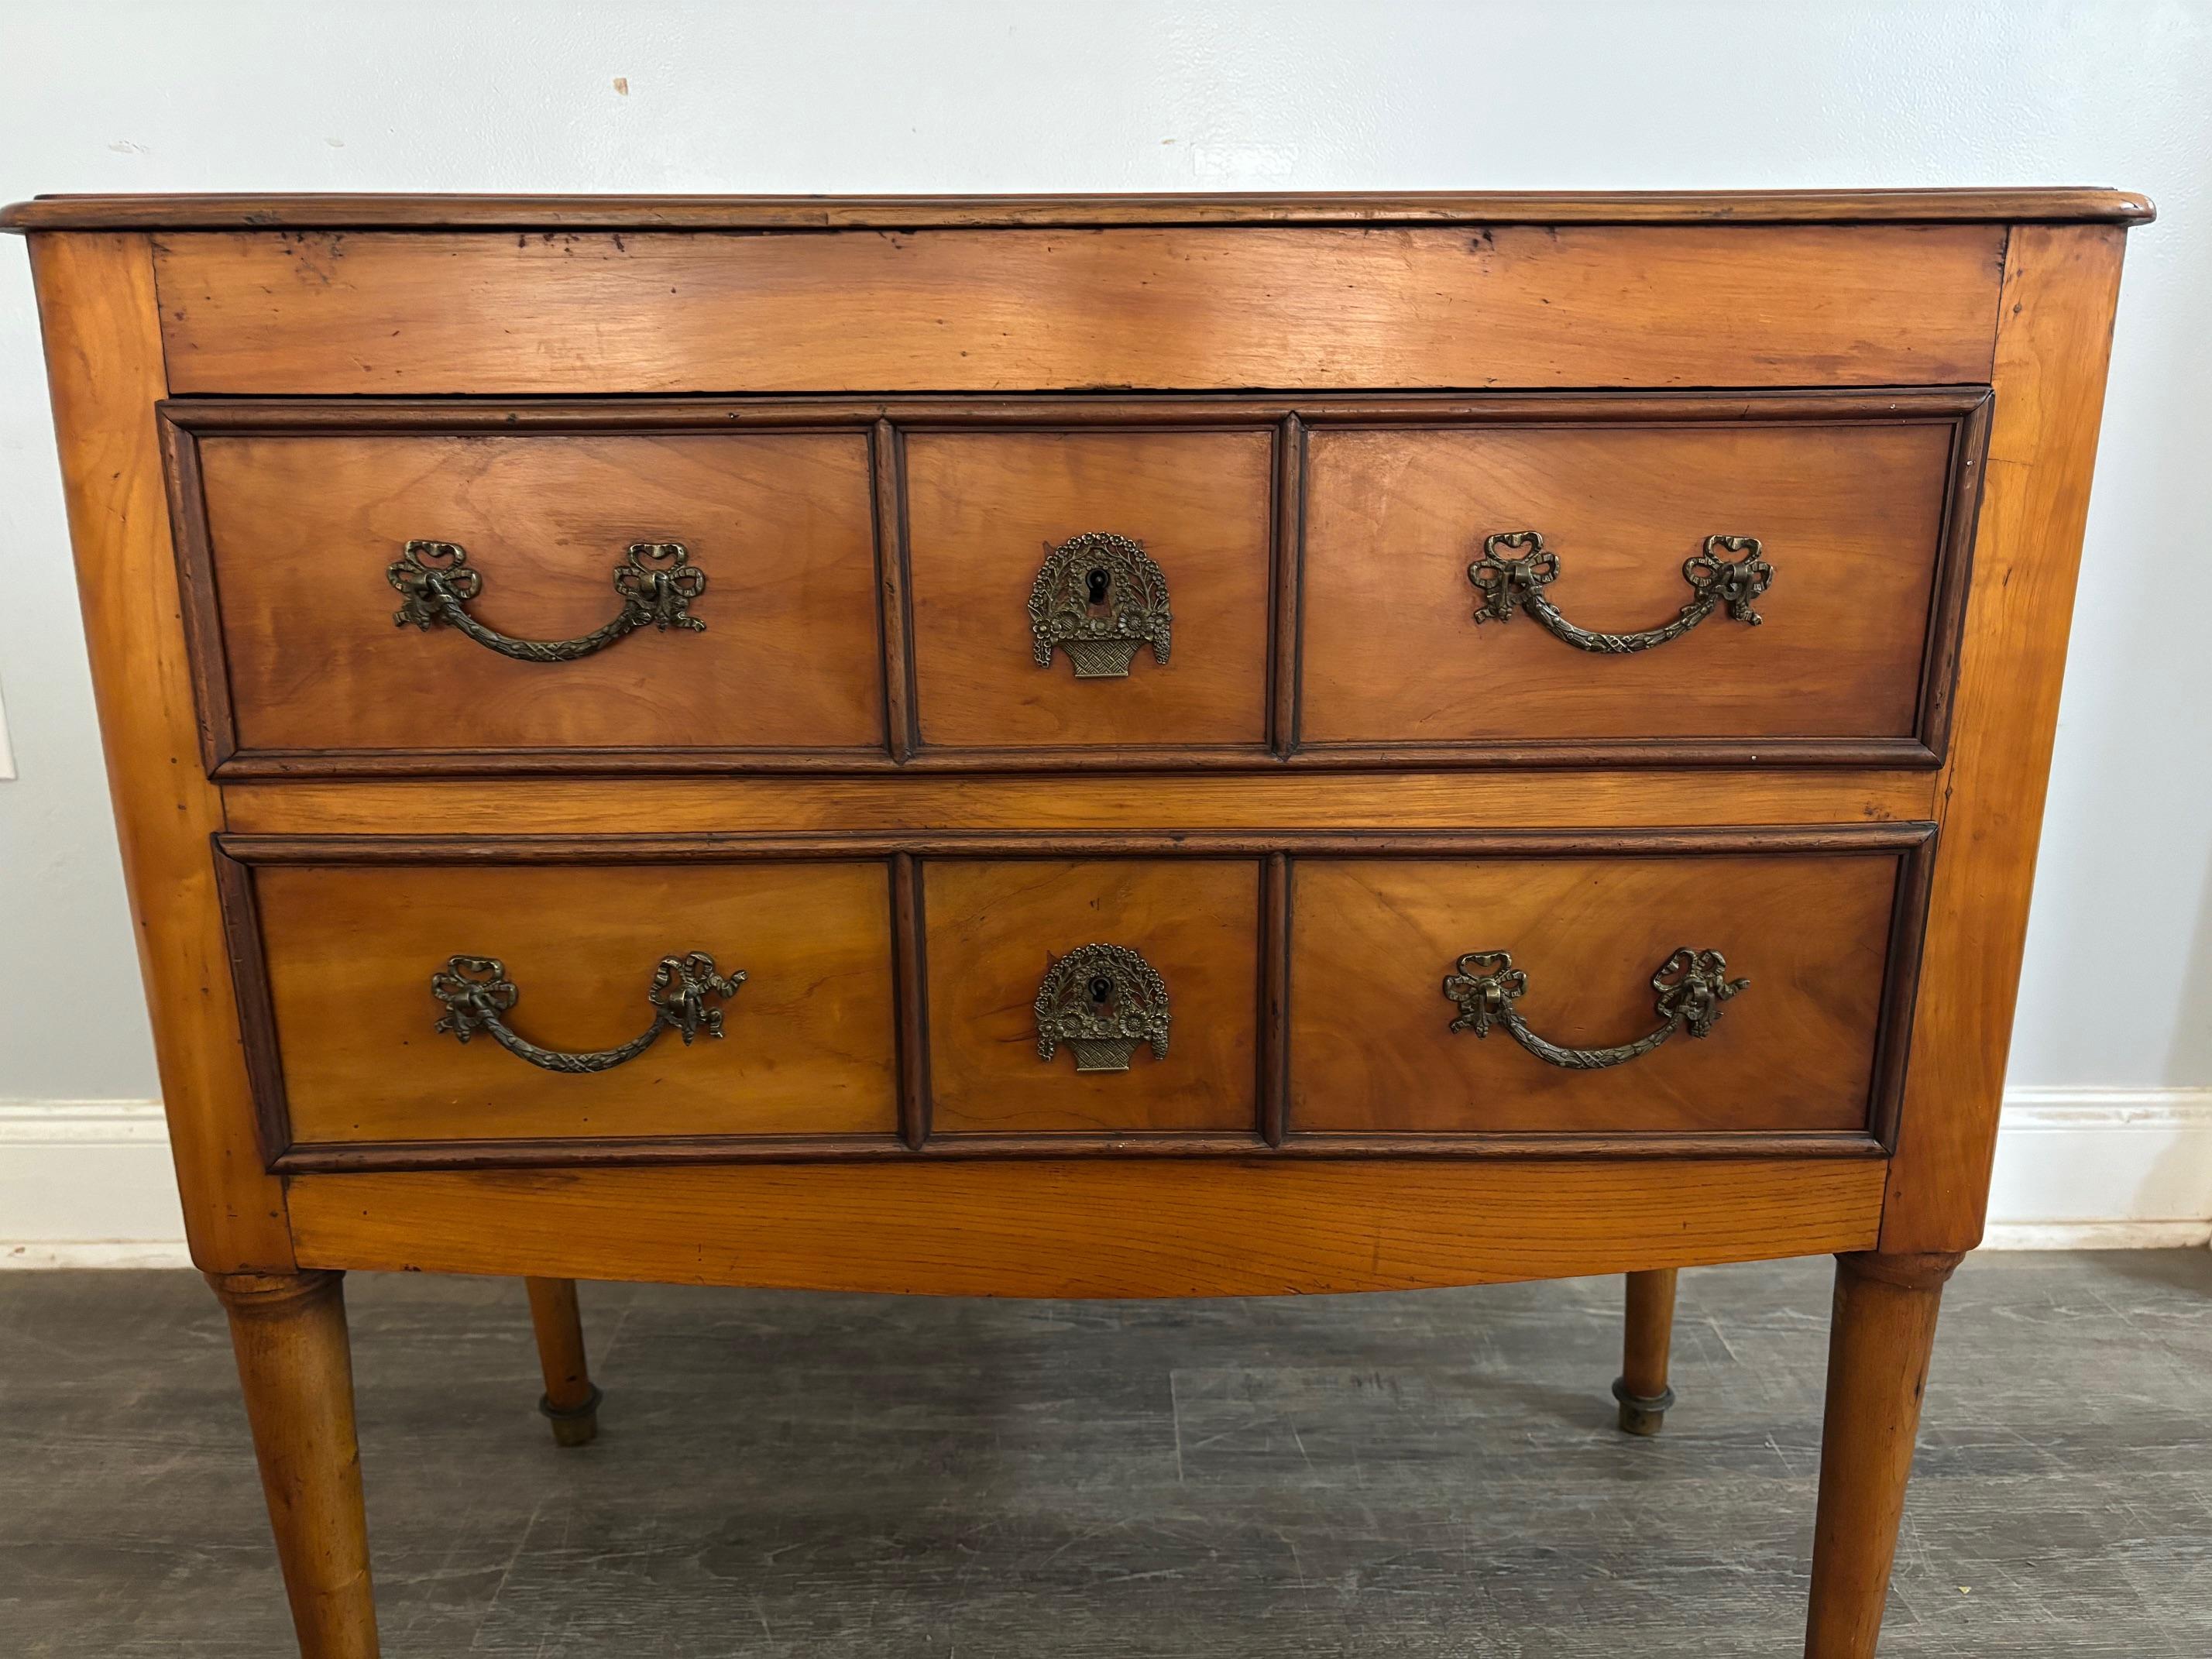 This Louis XVI French chest has 2 drawers. The hardwares are very refine, simple and elegant.